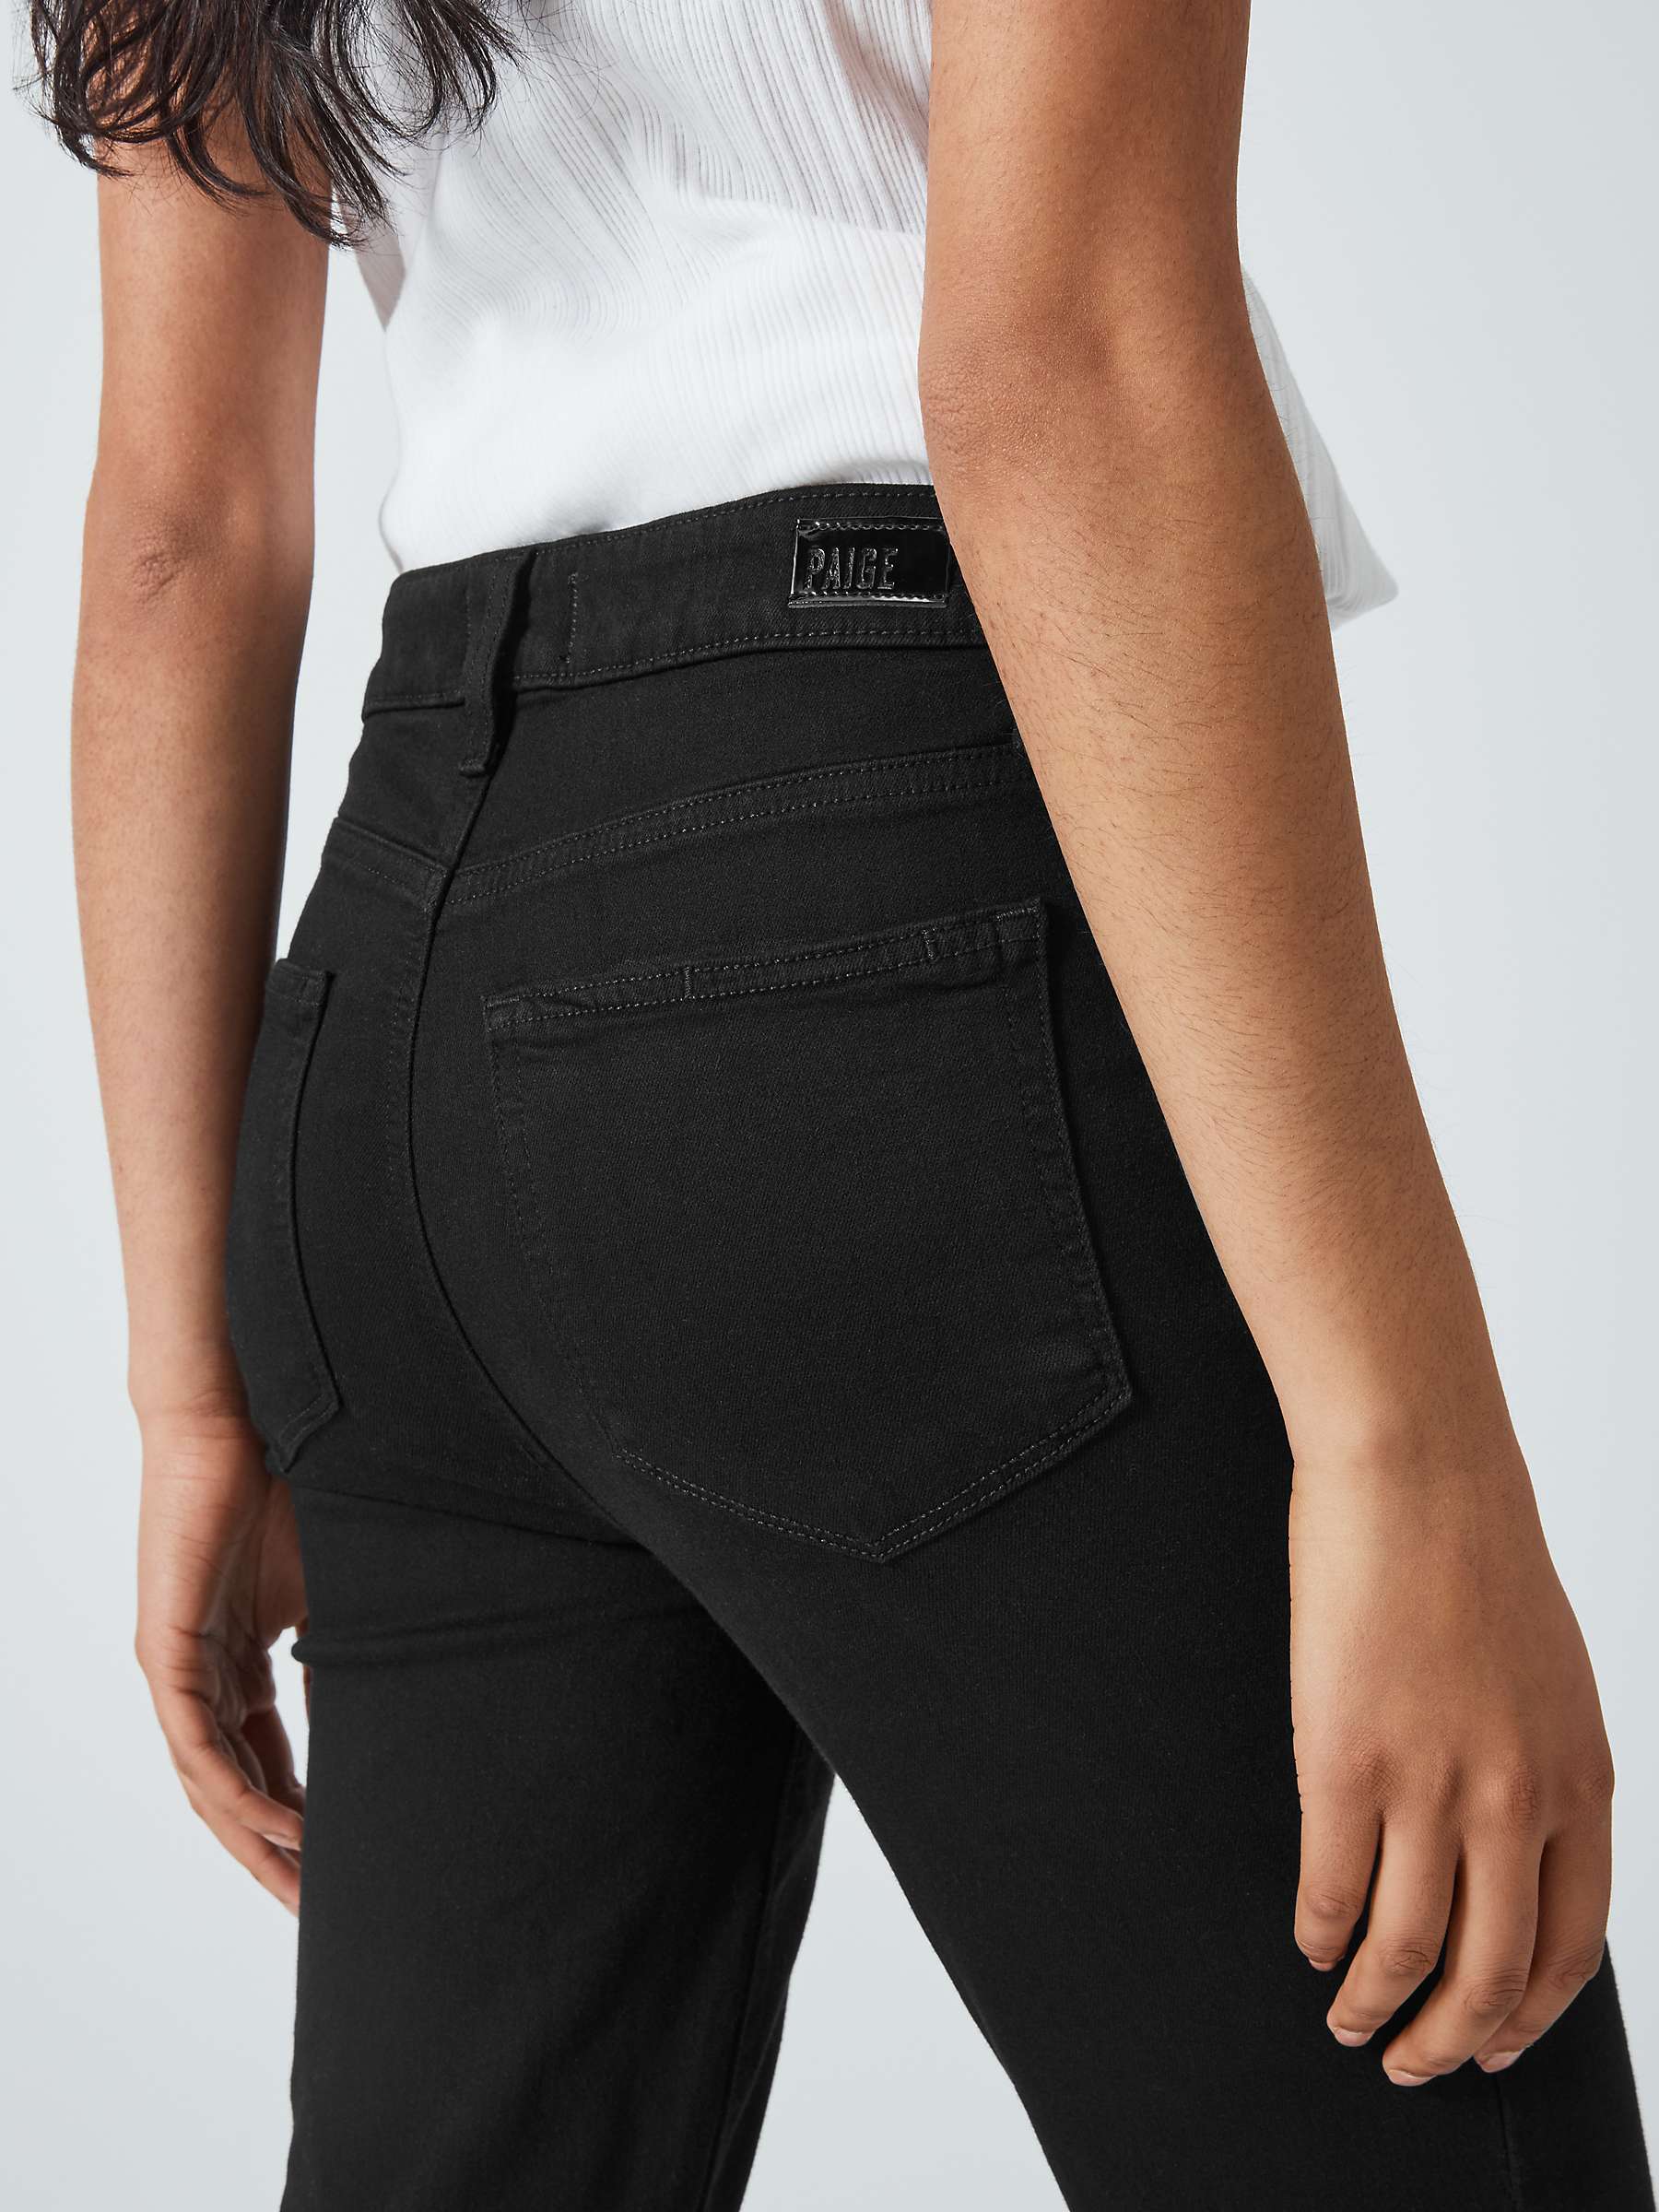 Buy PAIGE Cindy High Rise Straight Leg Jeans, Black Online at johnlewis.com